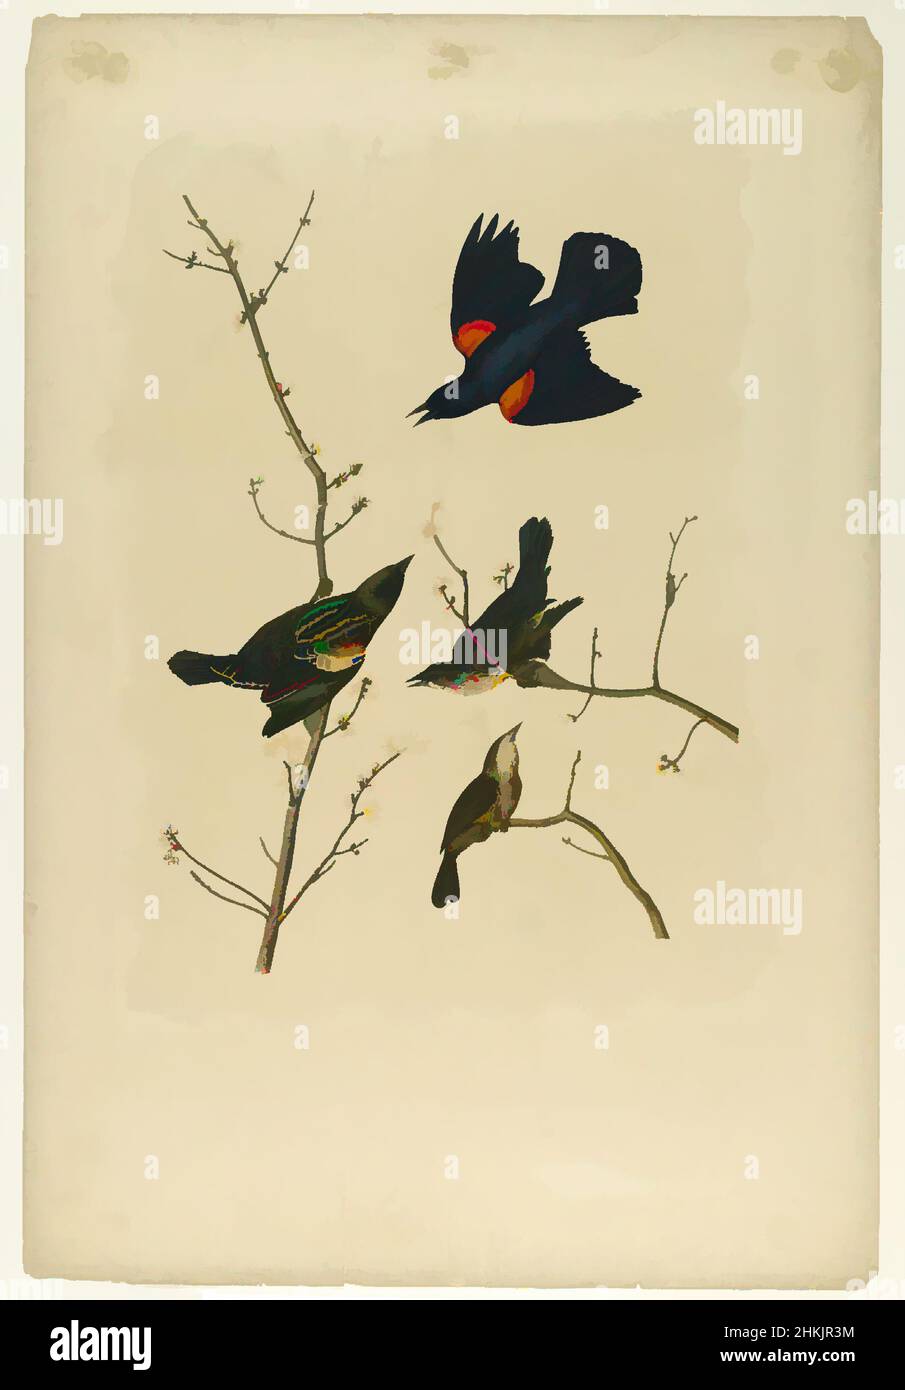 Art inspired by Red-winged Starling or Marsh Blackbird, John James Audubon, American, born Haiti, 1785-1851, Chromolithograph, 1861, Acer, audubon, birds, branches, chromolithograph, fauna, flora, flying, Icterus Phoeniceus, illustration, marsh blackbird, natural history, Nature, nature, Classic works modernized by Artotop with a splash of modernity. Shapes, color and value, eye-catching visual impact on art. Emotions through freedom of artworks in a contemporary way. A timeless message pursuing a wildly creative new direction. Artists turning to the digital medium and creating the Artotop NFT Stock Photo